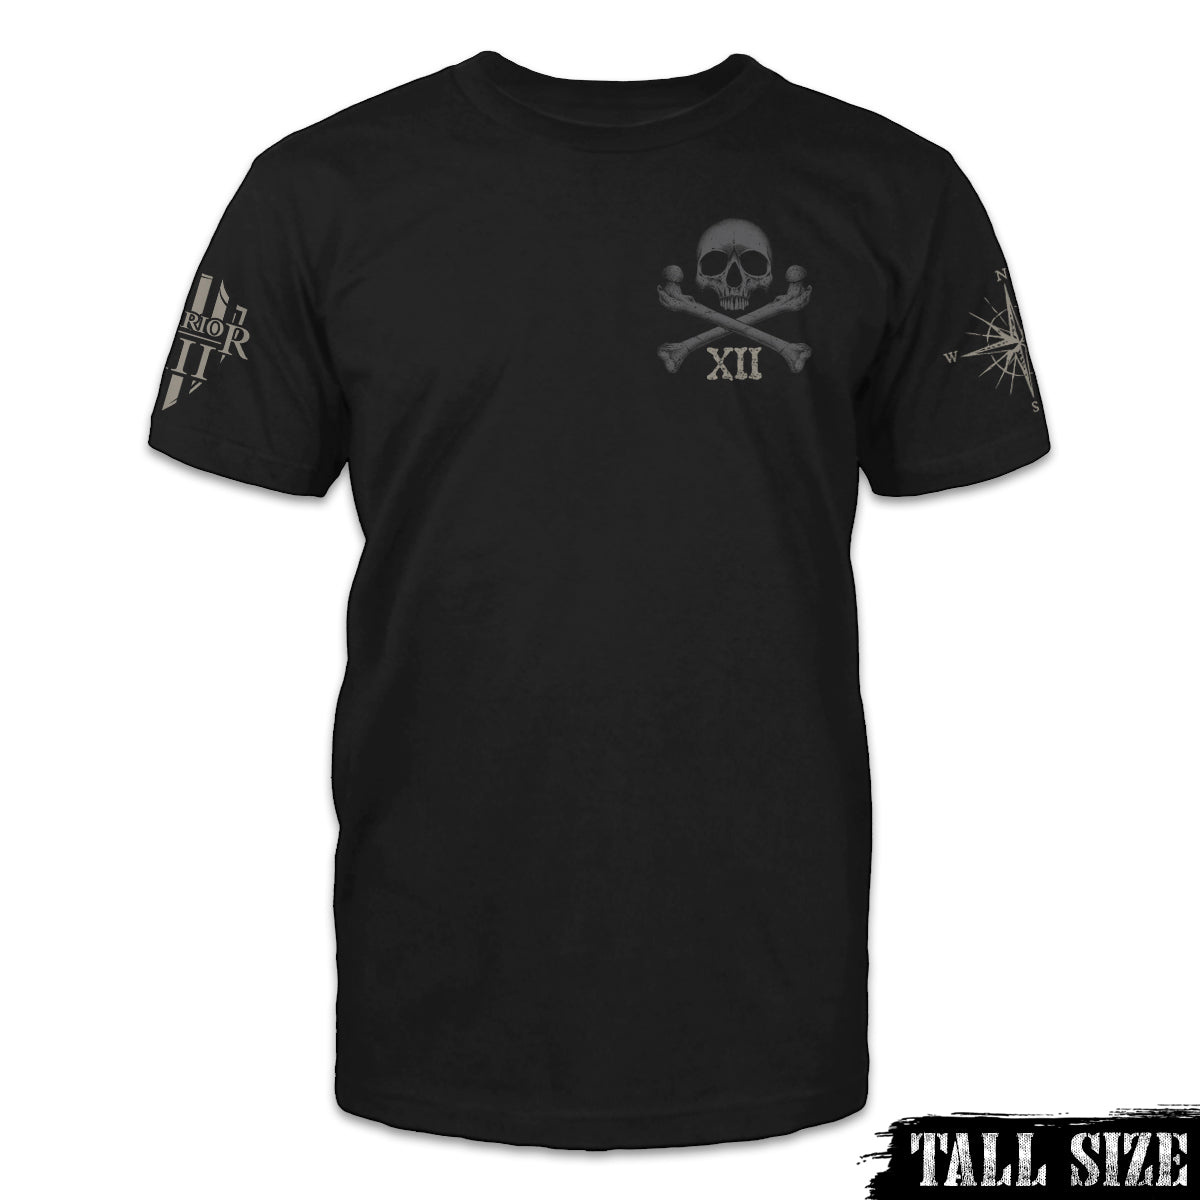 A black tall size shirt with skull and crossbones with roman numerals XII printed on the front.